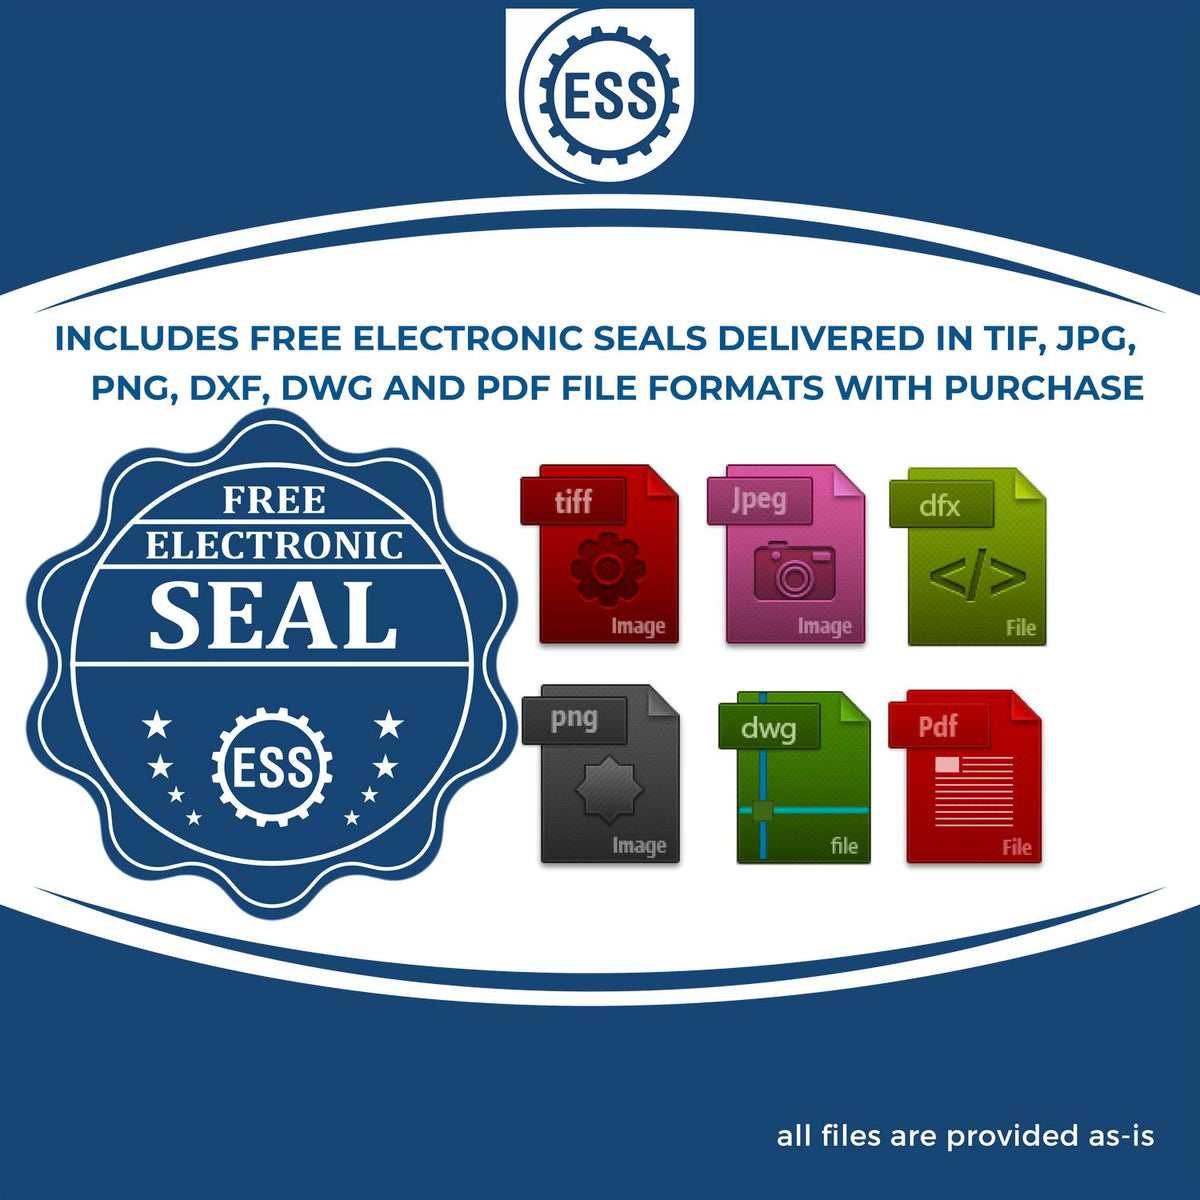 An infographic for the free electronic seal for the Heavy Duty Cast Iron Kansas Land Surveyor Seal Embosser illustrating the different file type icons such as DXF, DWG, TIF, JPG and PNG.